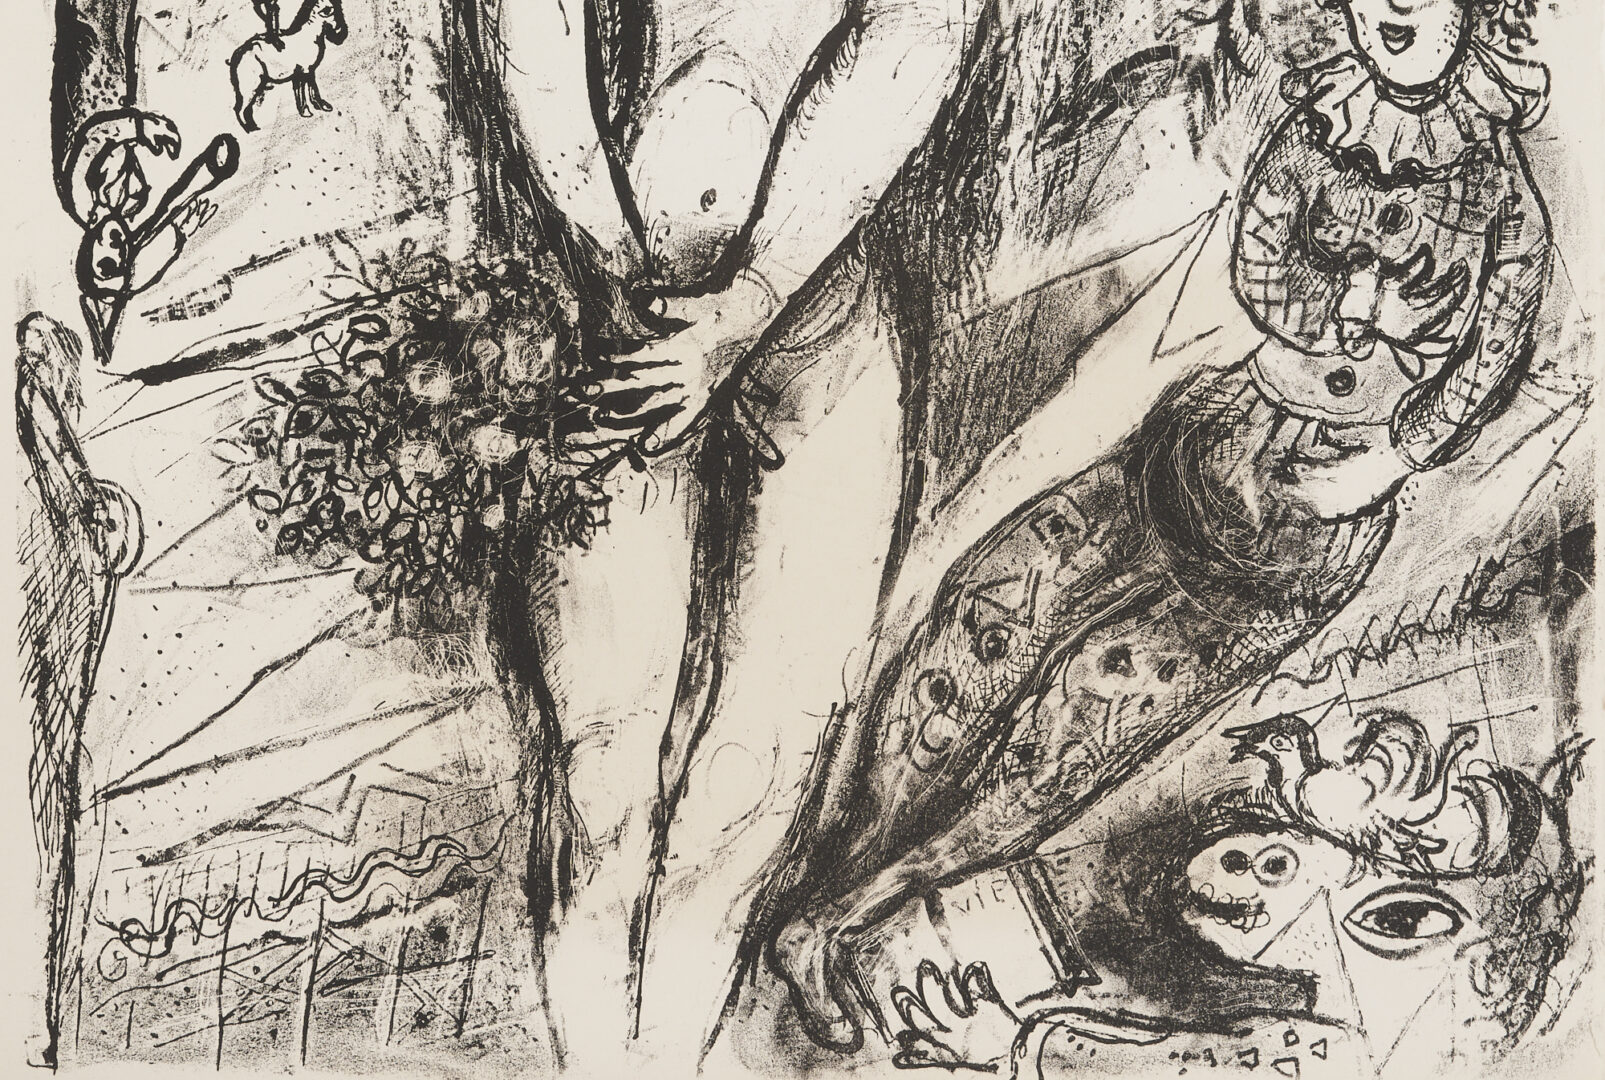 Lot 700: Marc Chagall Black/White Litho from The Circus, 1967, M. 520